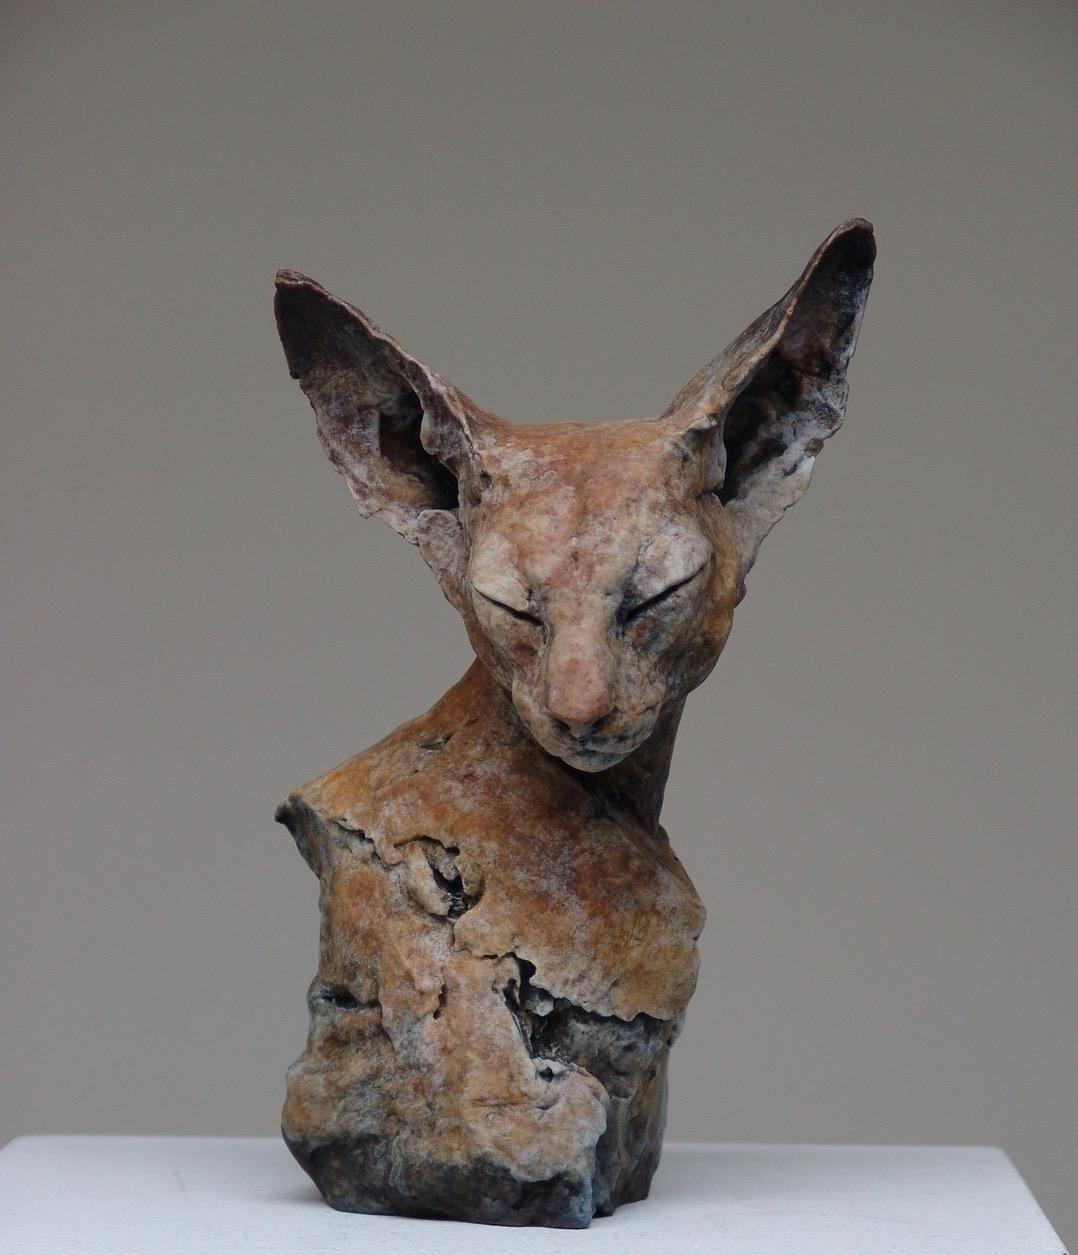 Nichola Theakston (1967) has established herself as one of the UK’s foremost contemporary sculptors working within the animal genre. 

With the ''Bastet Study 1'' Nichola shows how exquisite she can capture the feelings and expressions in an animal.